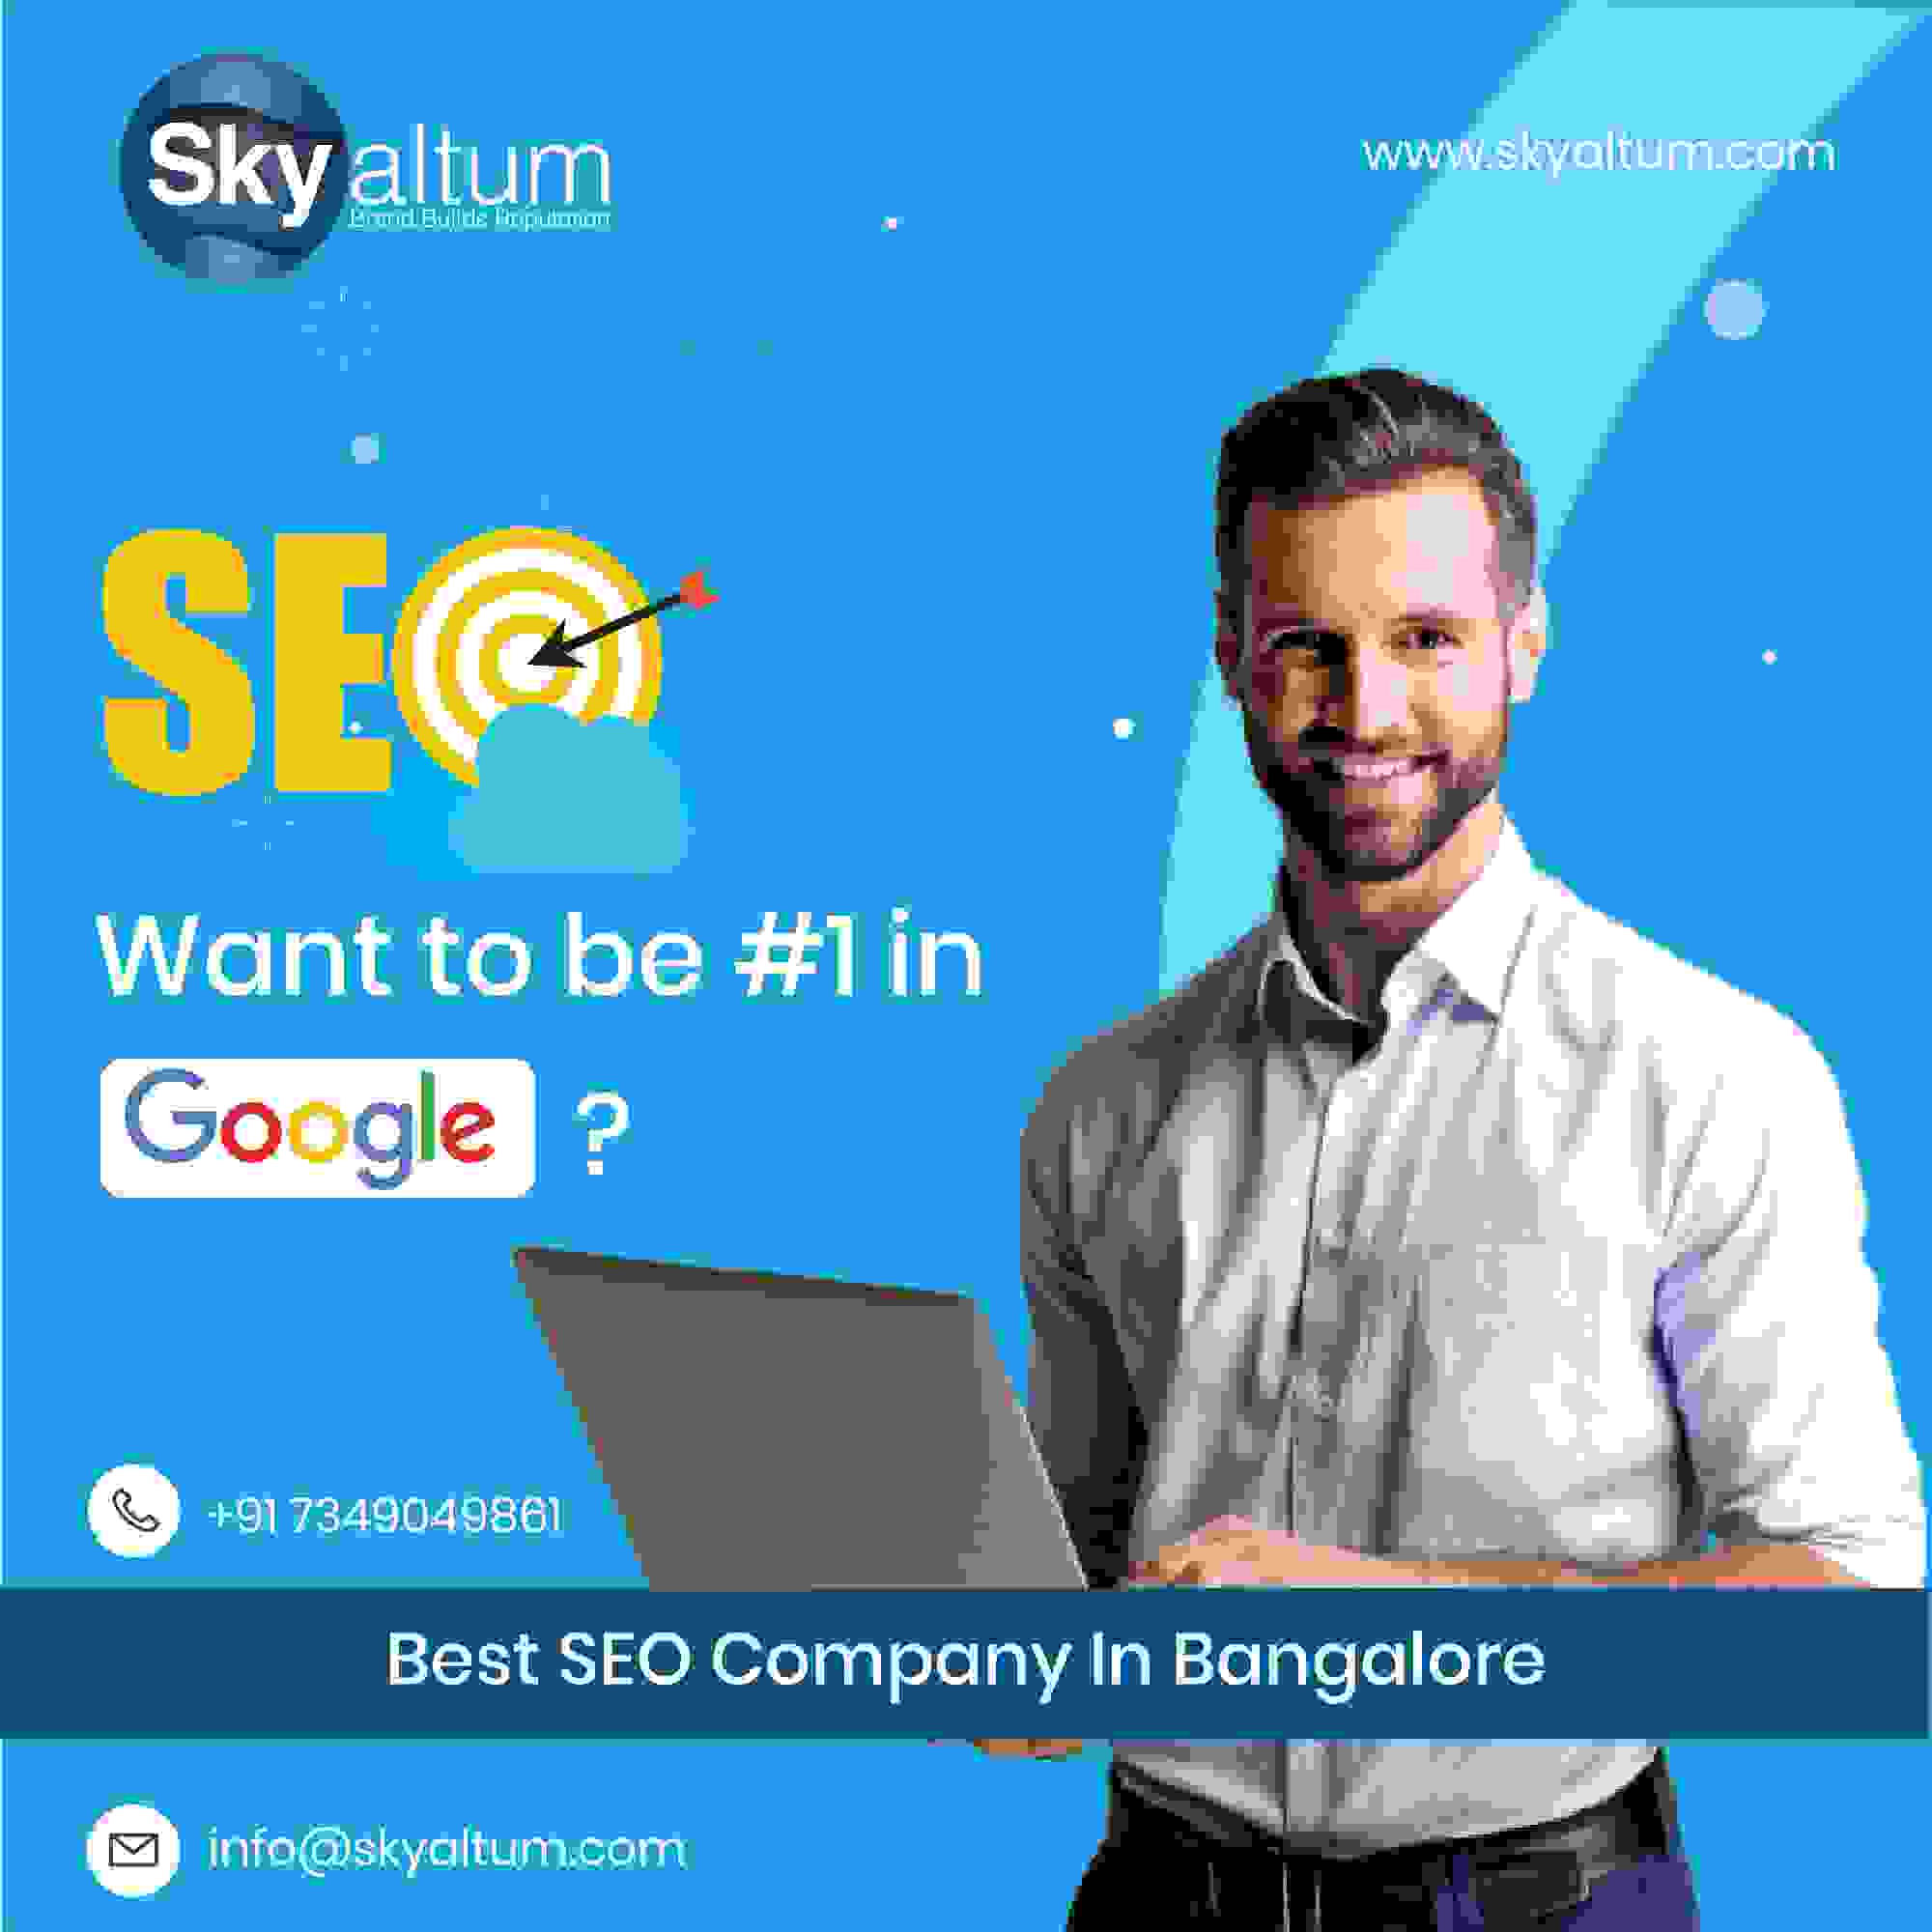 Looking for 1st Page Results in Google? Best seo company in Bangalore Skyaltum